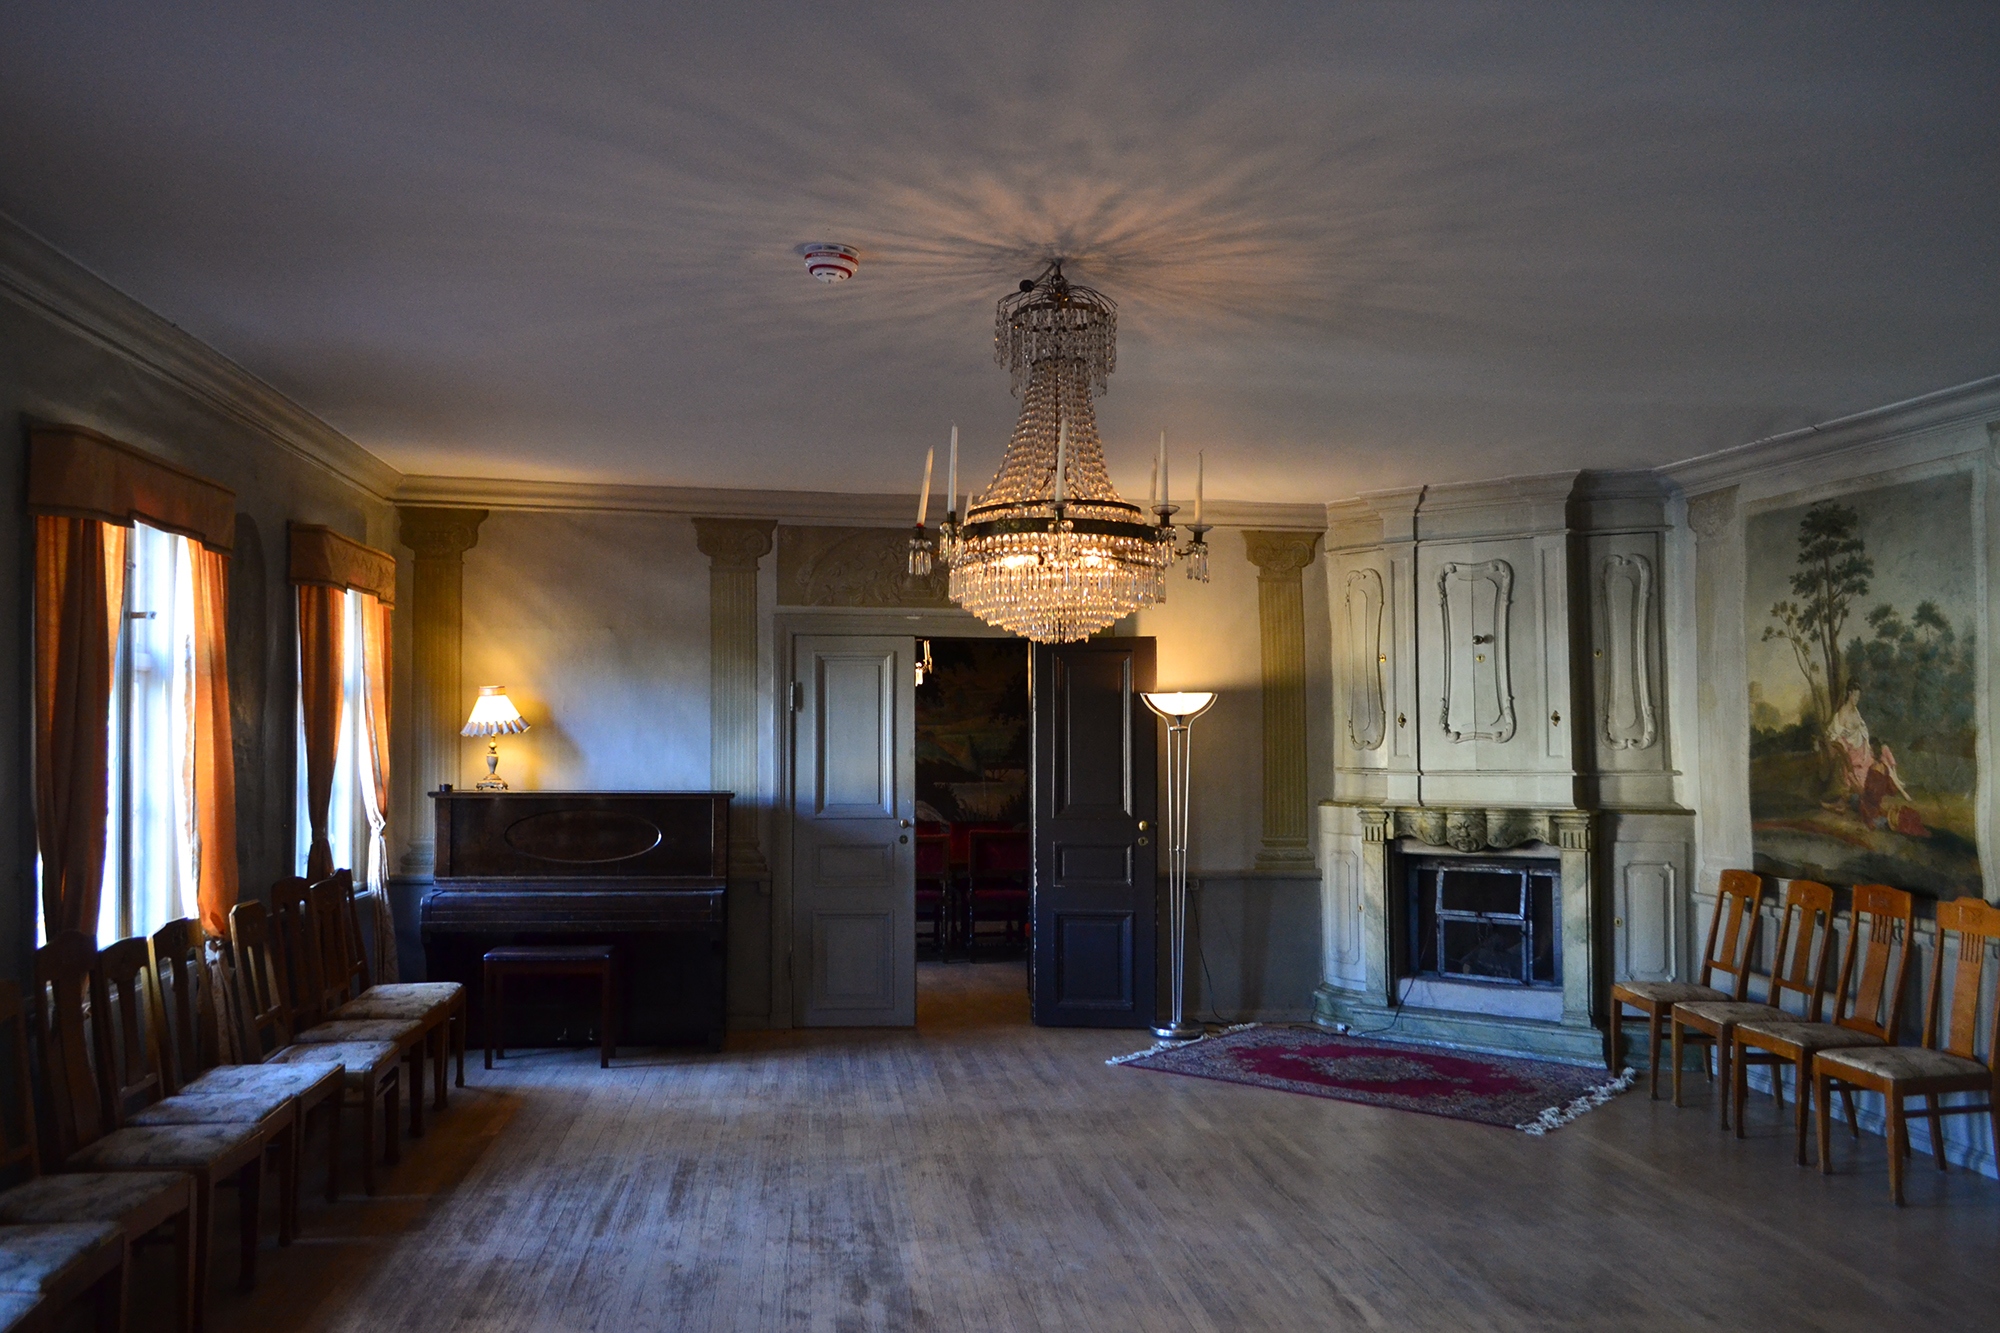 Salongen at Gathenhielmska Huset, with a chandelier, a piano, two lamps, chairs and tapestries on the wall.